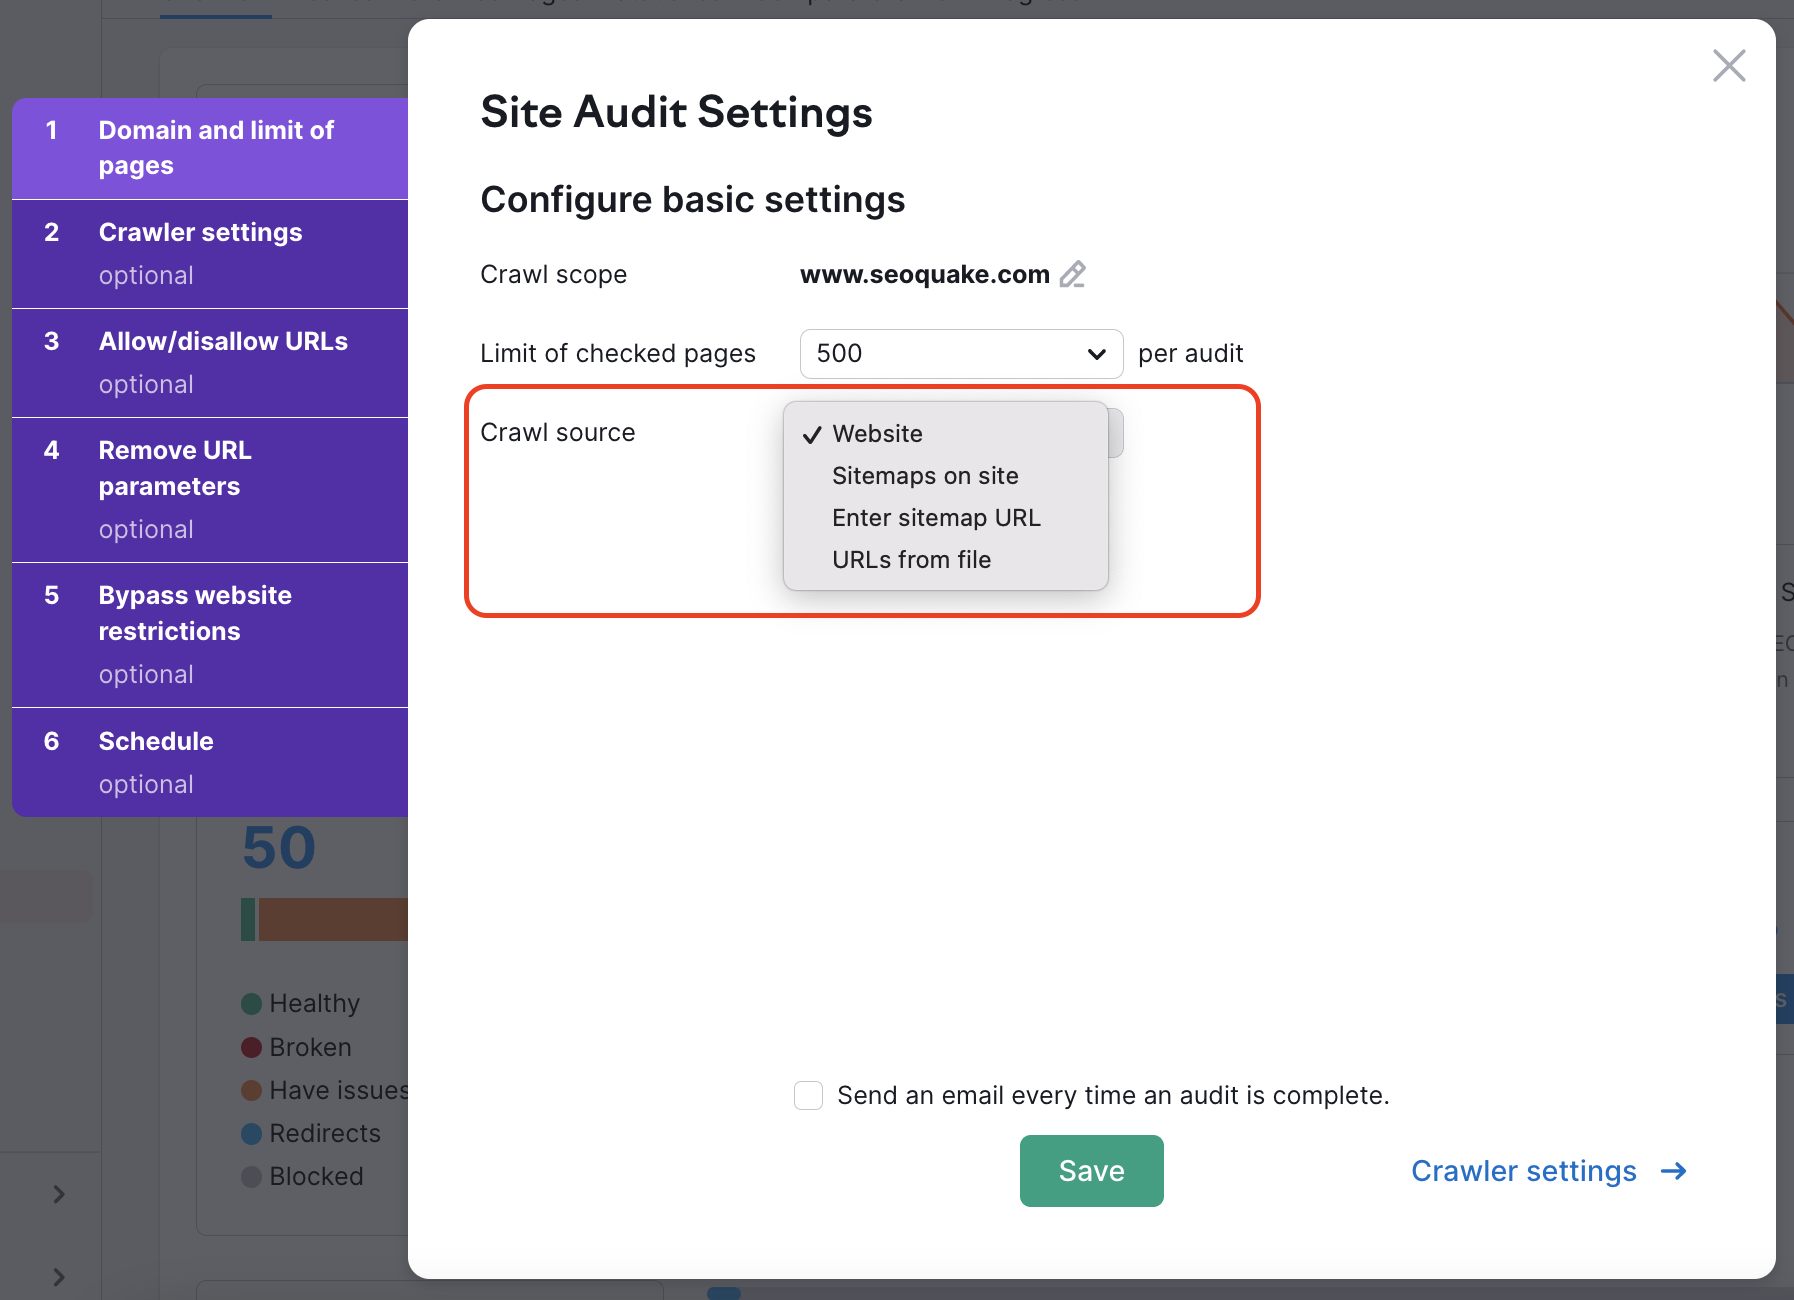 Crawl source options are highlighted in the Site Audit Settings window.